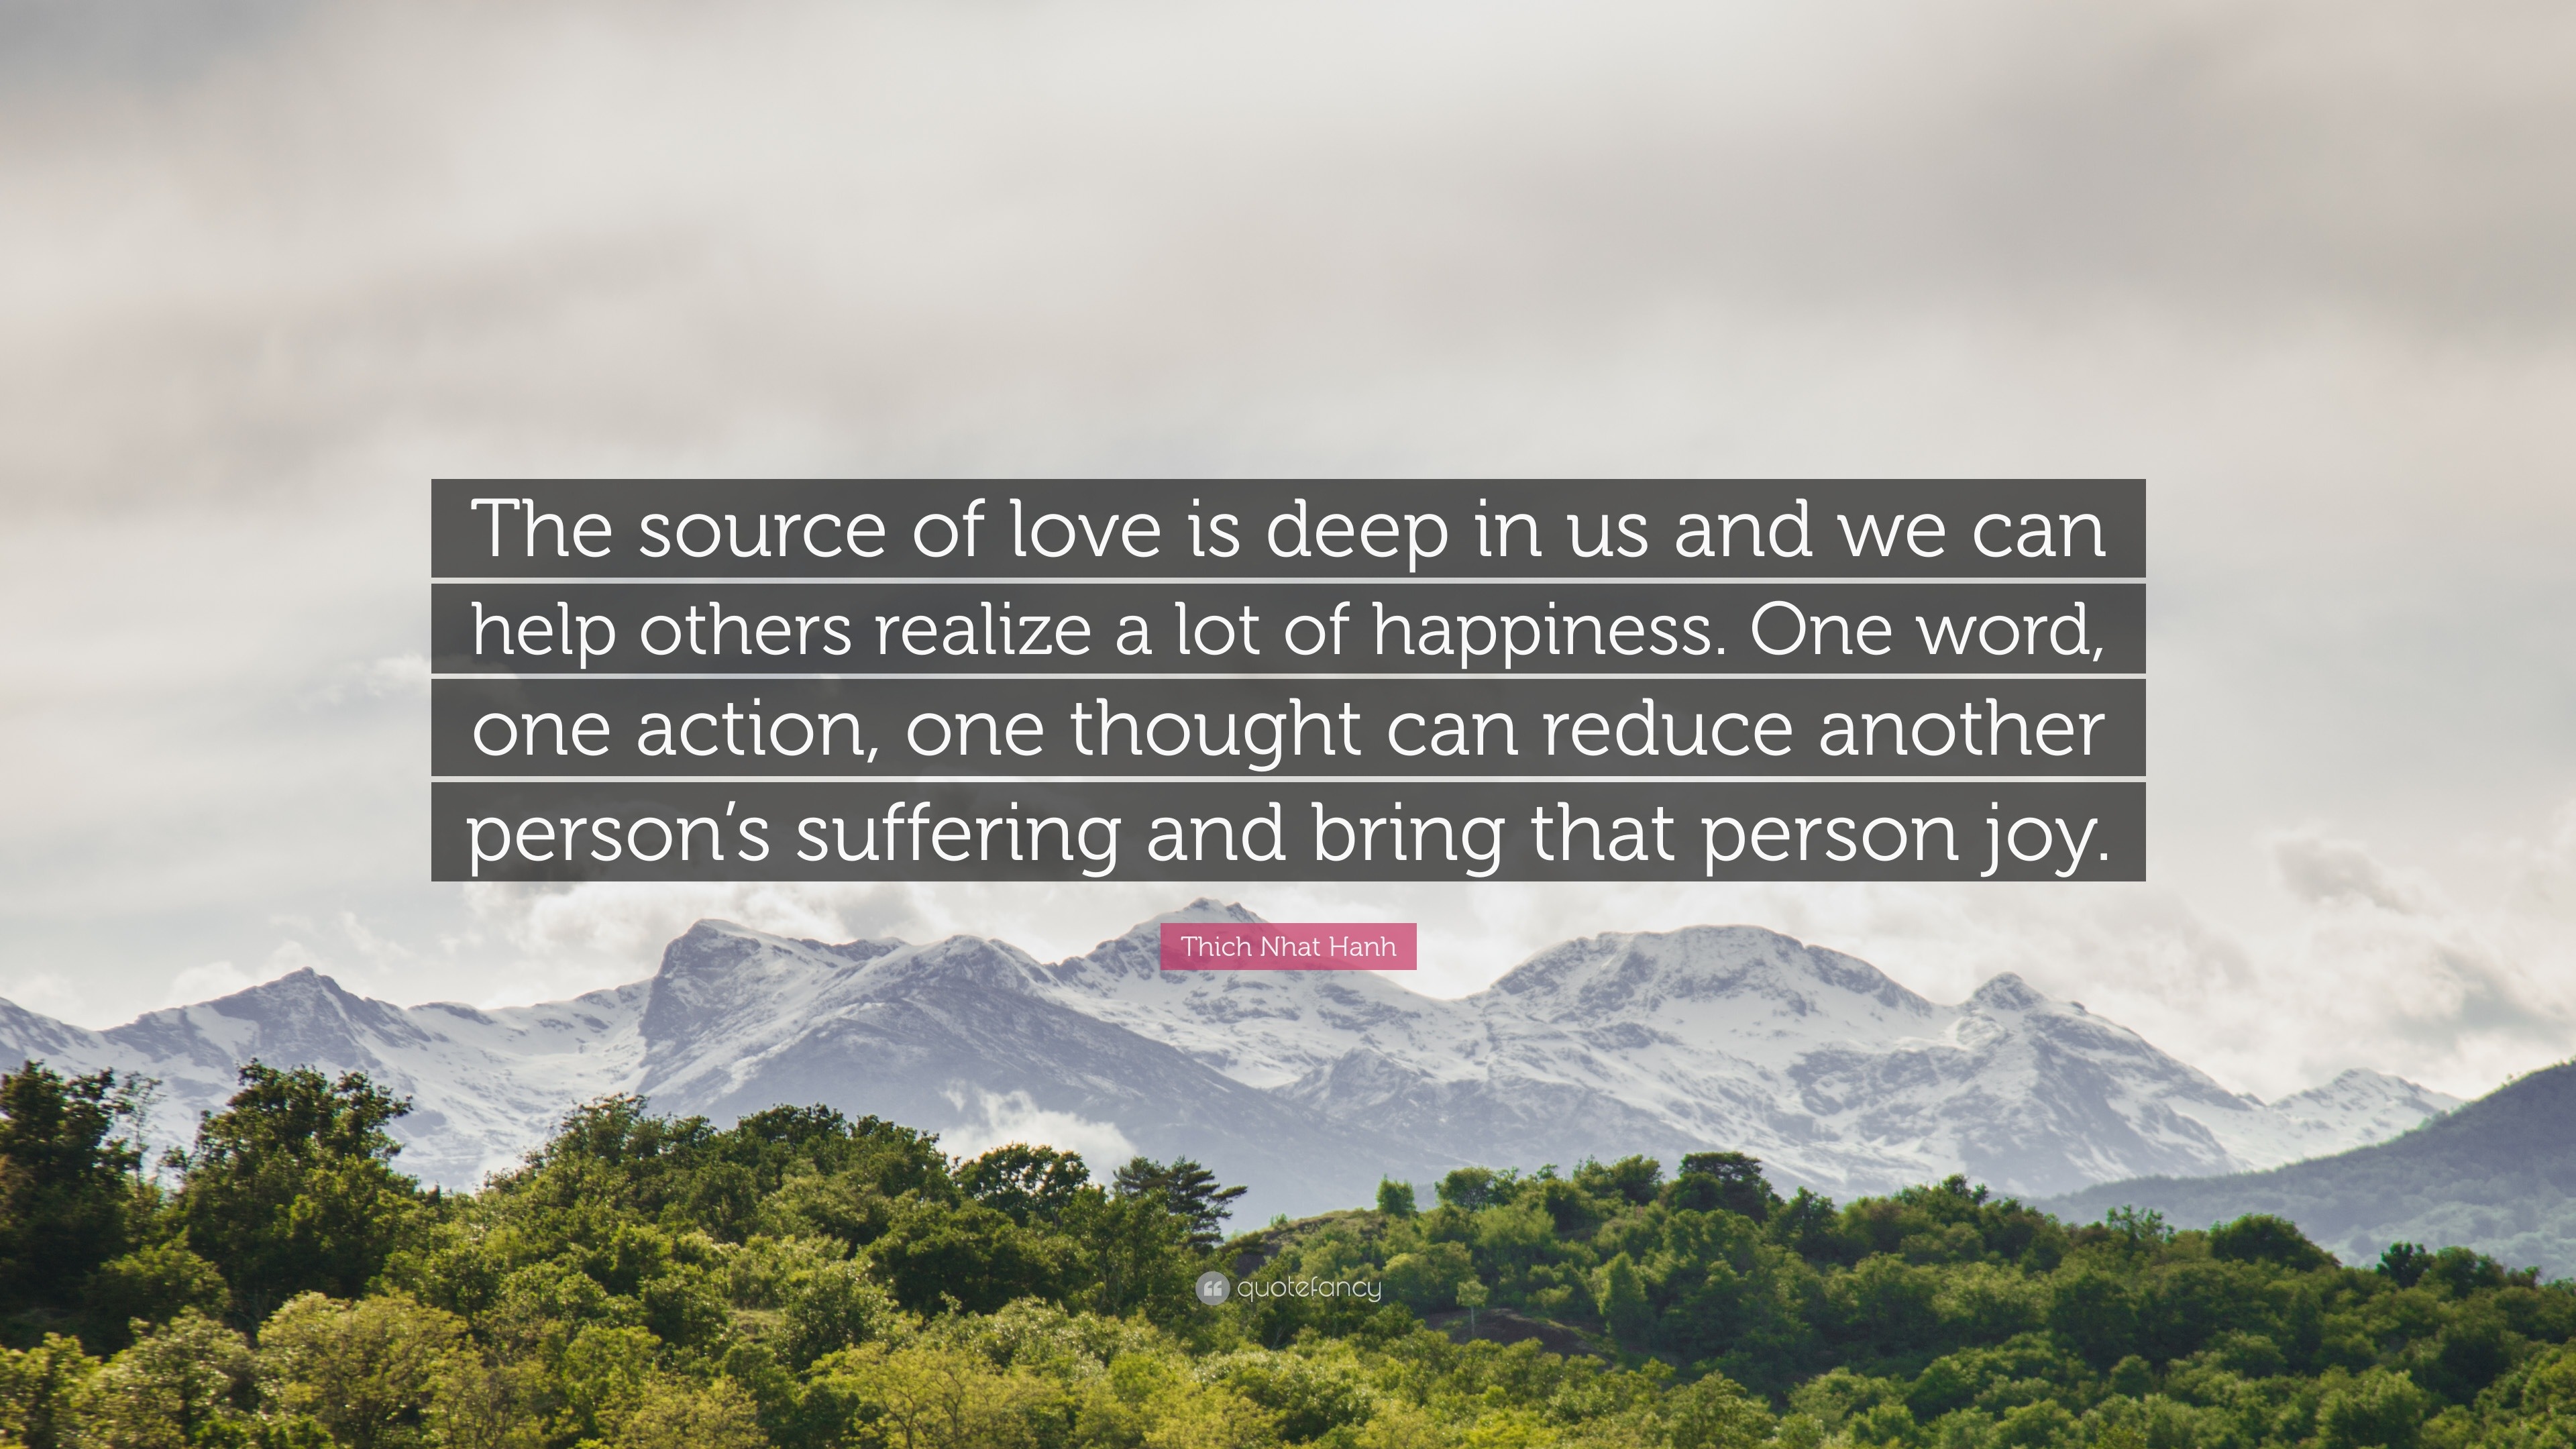 Thich Nhat Hanh Quote “The source of love is deep in us and we